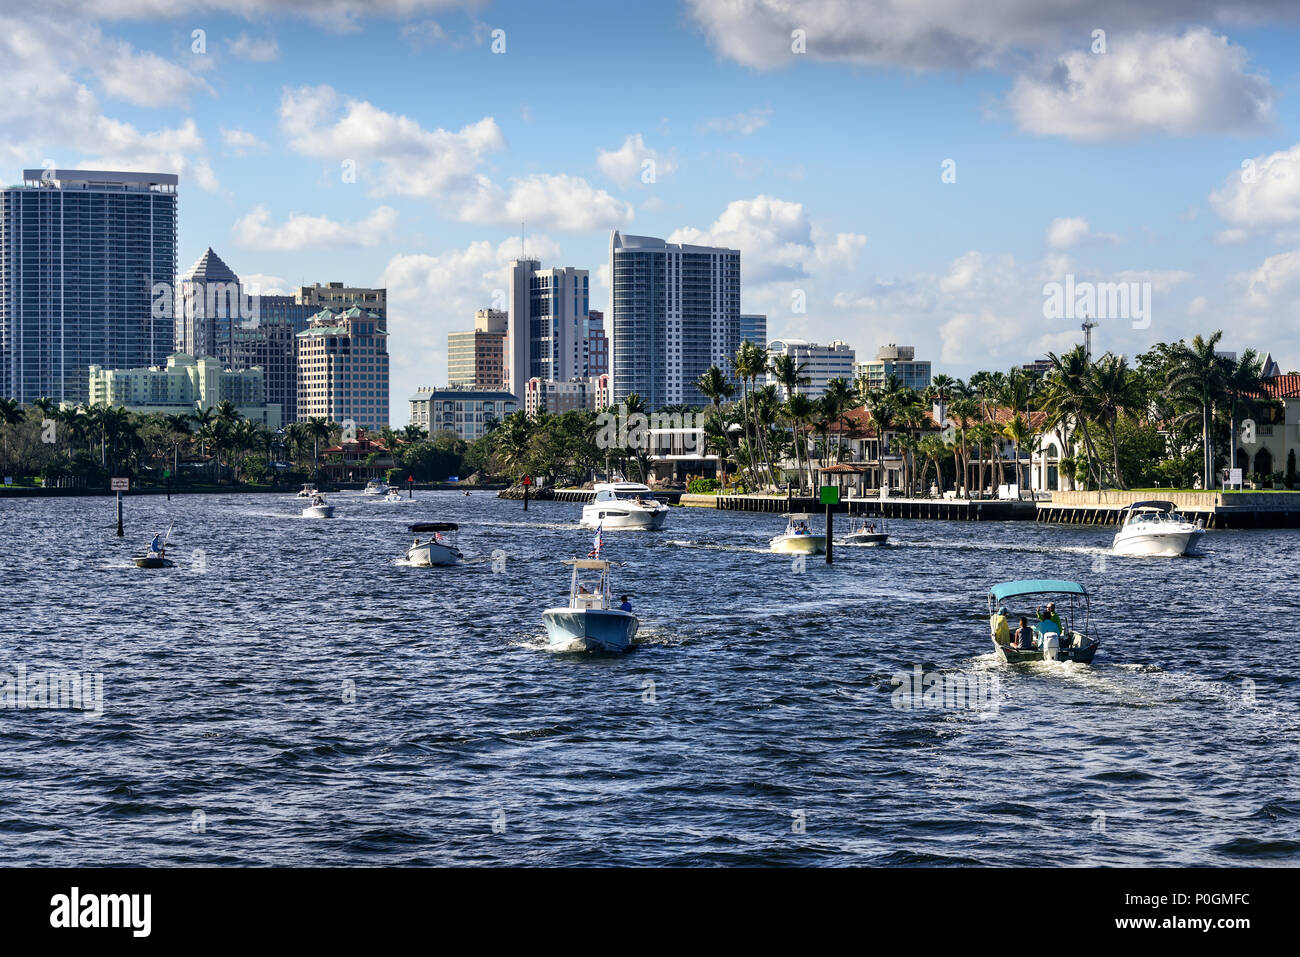 Ft. Lauderdale, Florida - February 18, 2018:  Business and pleasure boats going up and down the intracoastal waterway in Ft. Lauderdale. Stock Photo